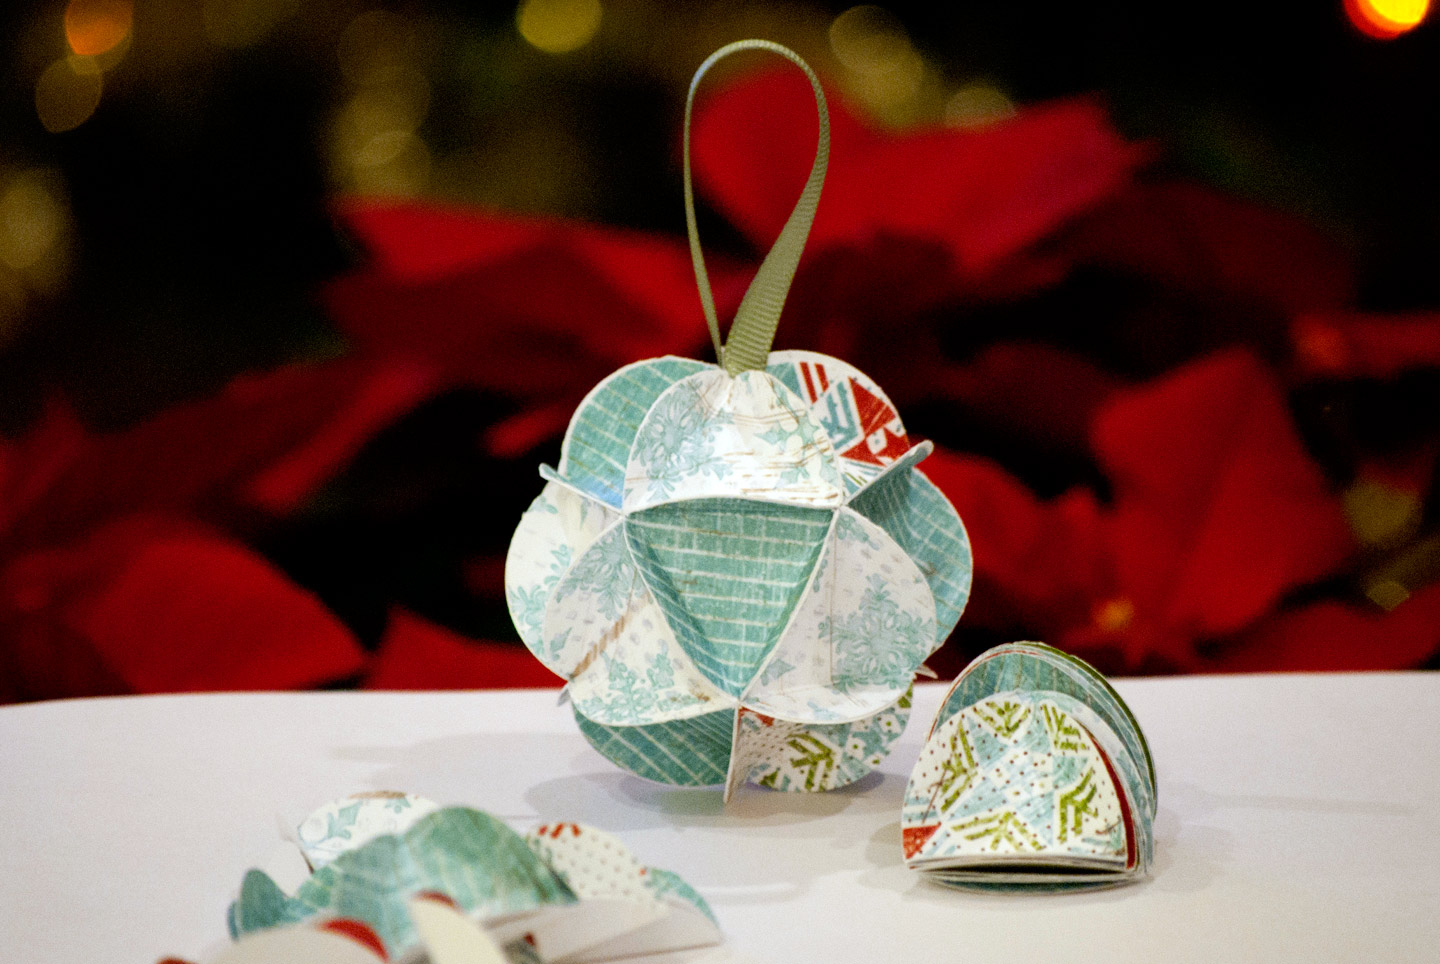 Oldfashioned paper ball ornaments Keeping With The Times